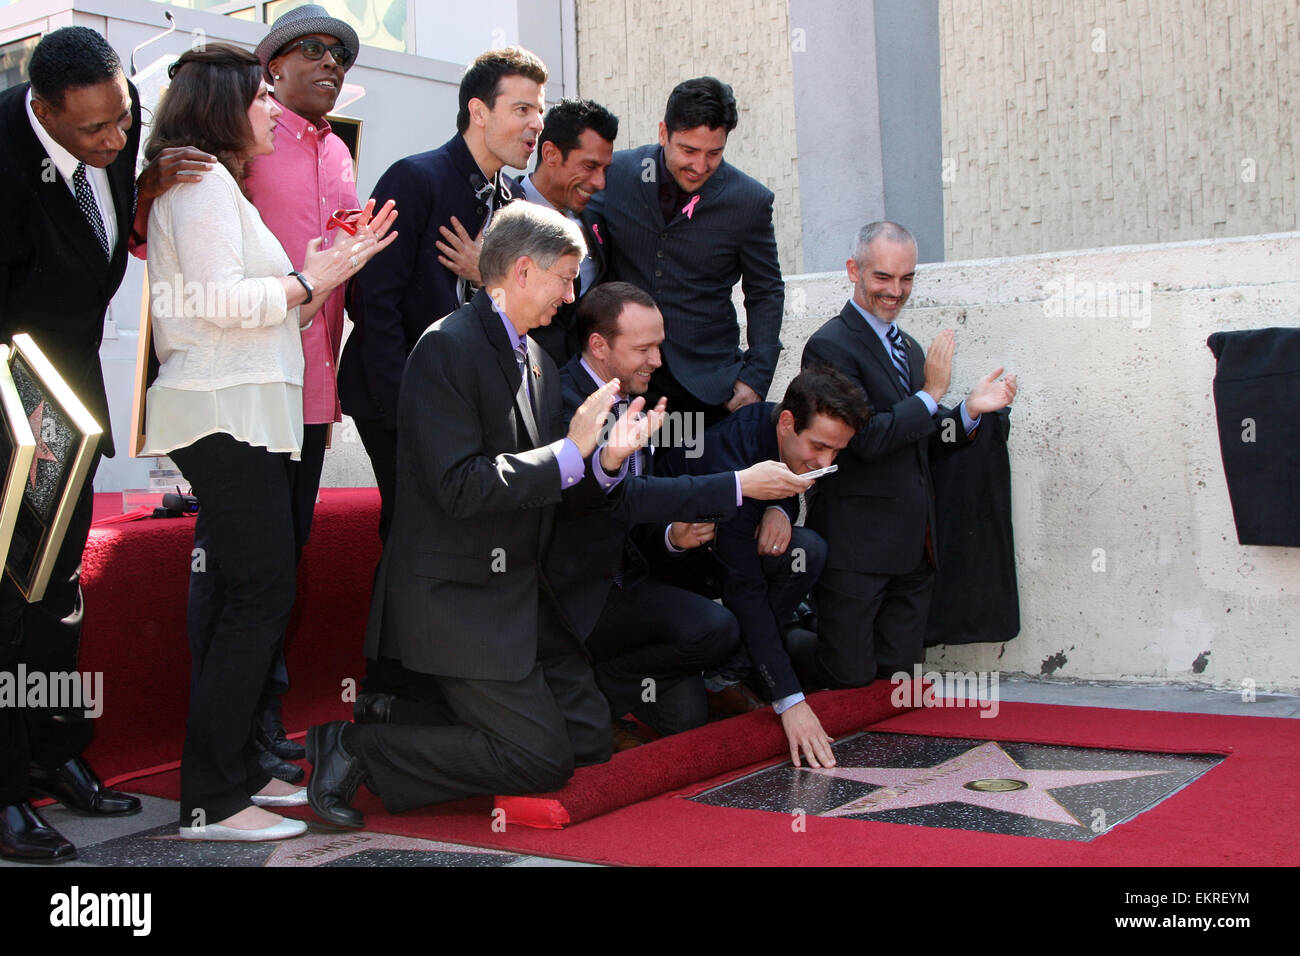 New Kids on the Block Hollywood Walk of Fame Star Ceremony  Featuring: New Kids On The Block,Jordan Knight,Donnie Wahlberg,Joe McIntyre,Danny Wood,Guest Where: Los Angeles, California, United States When: 09 Oct 2014 Stock Photo